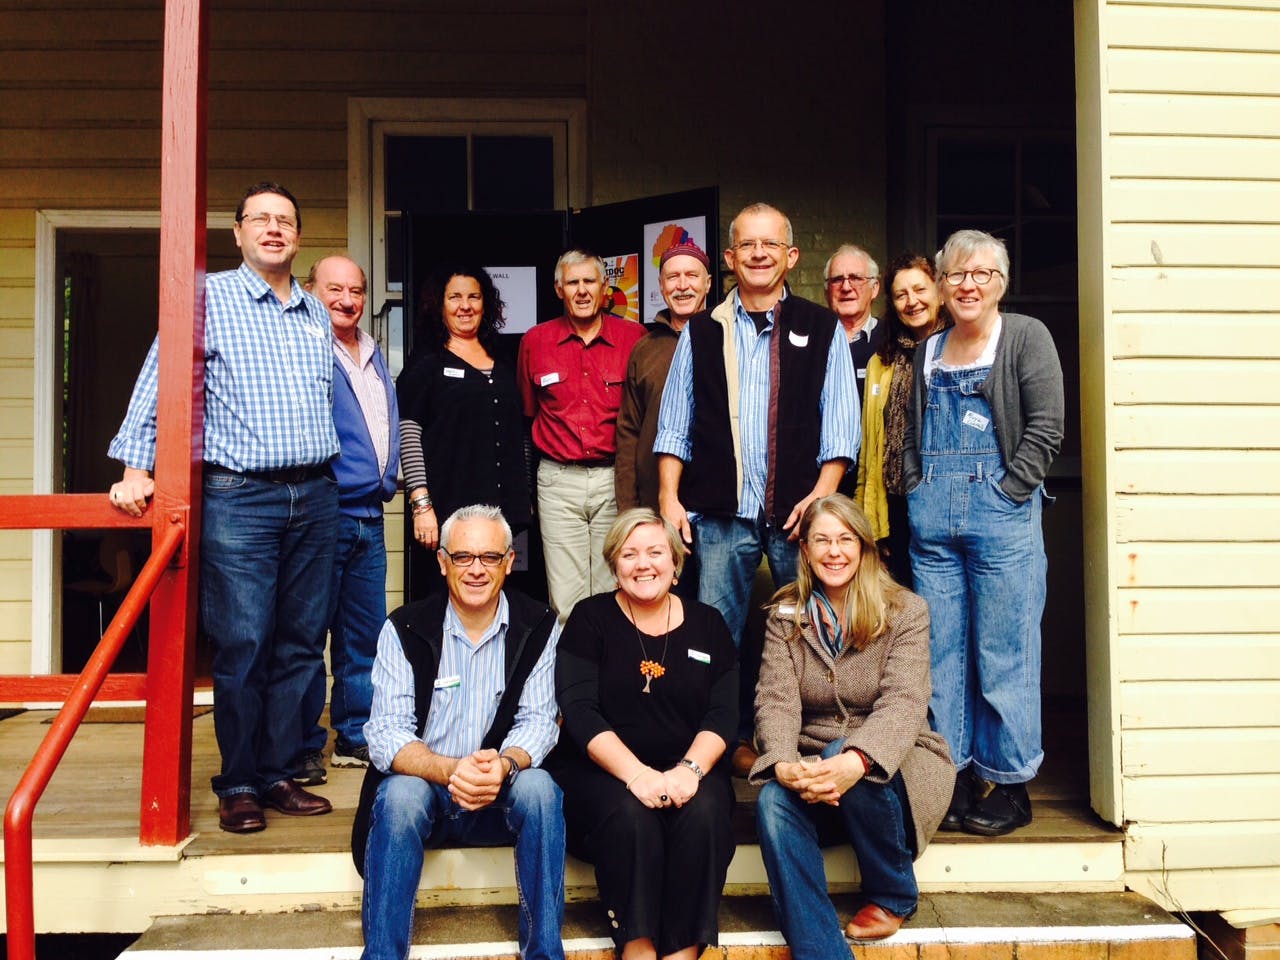 Photo 2 - Community Planning Day 1 - 23 May 2015 - Clunes